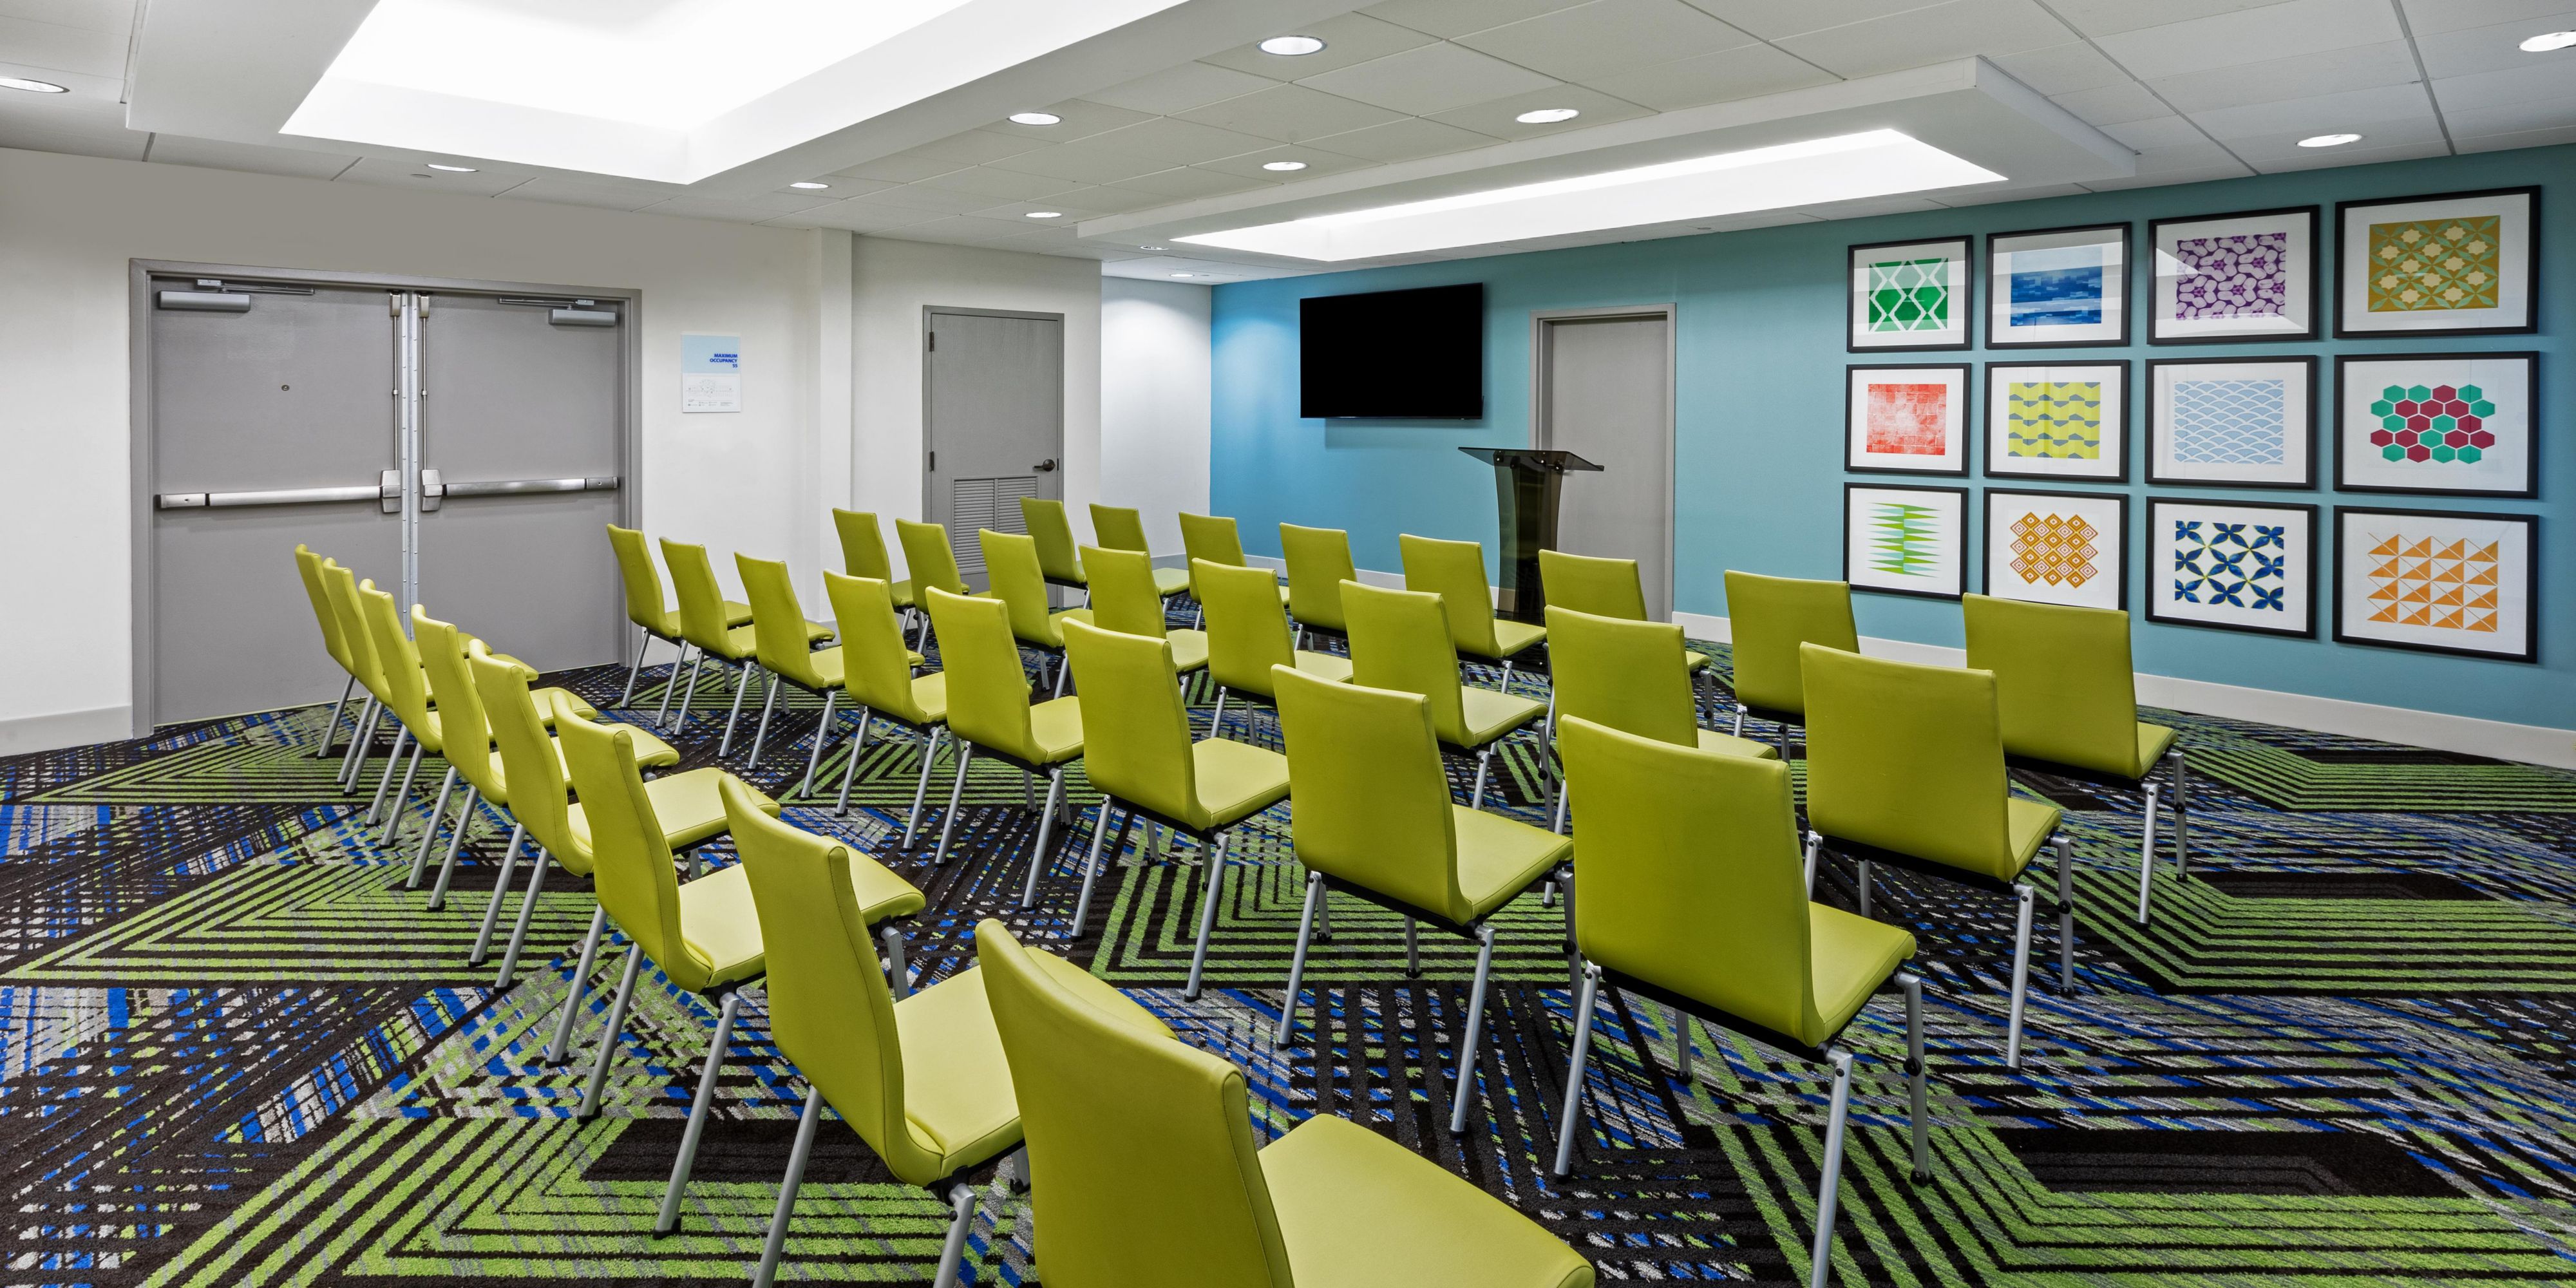 Experience our versatile 1137 square feet of space for your next event or meeting.  Perfect for small groups and executive meetings, we will work with you to set up all the essentials you need for your meeting including a/v equipment.